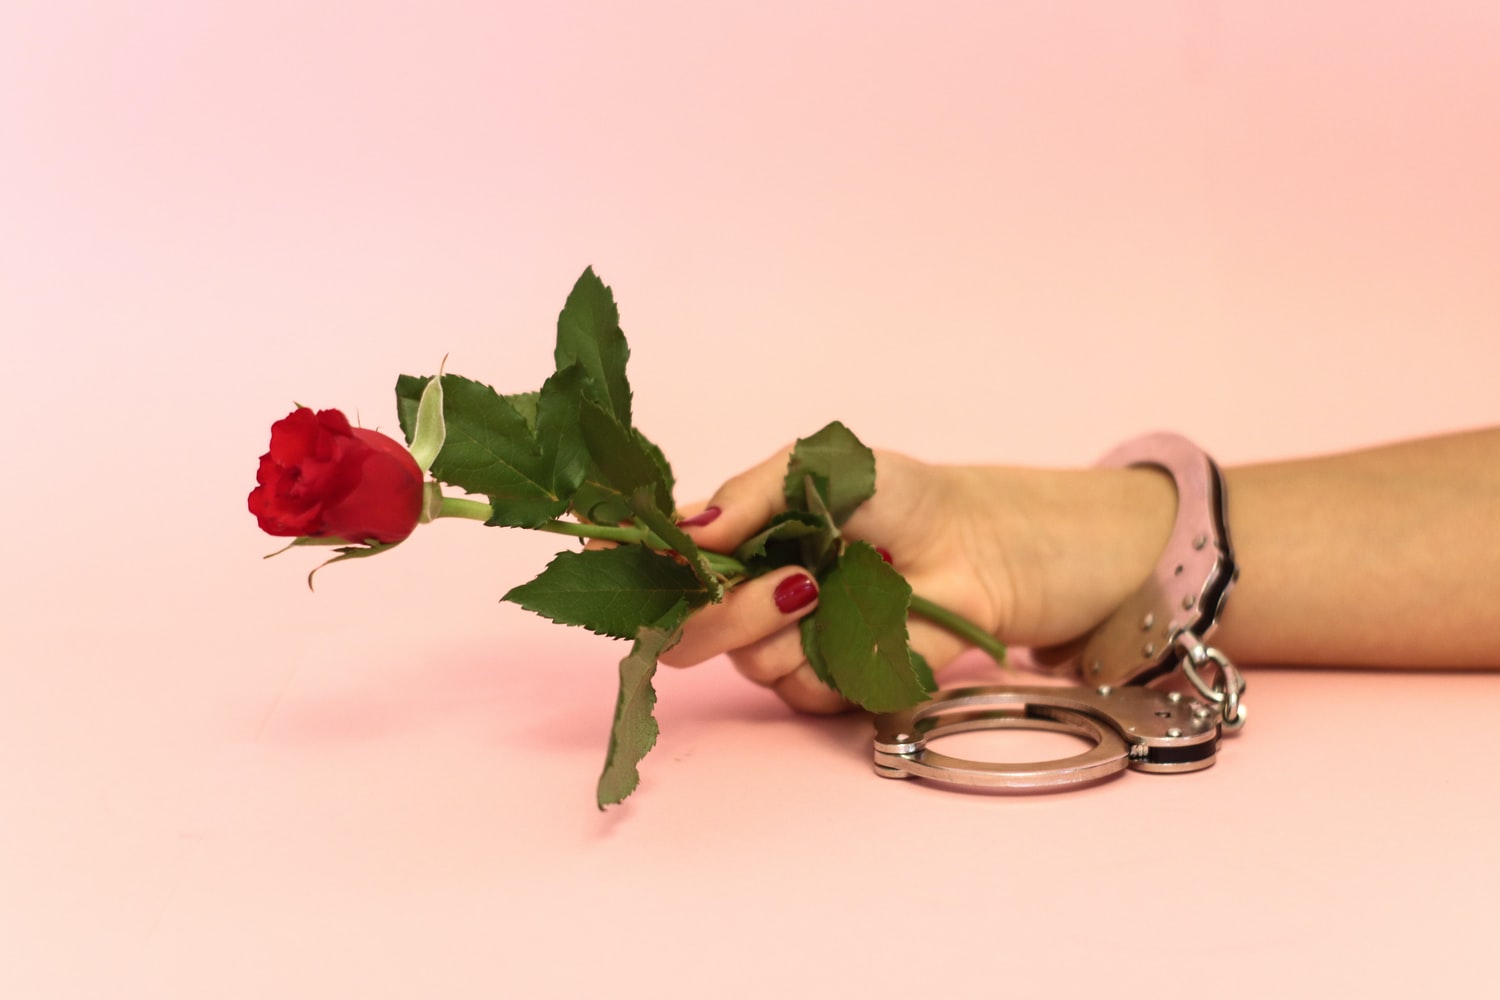 Woman’s wrist in handcuffs holding a rose